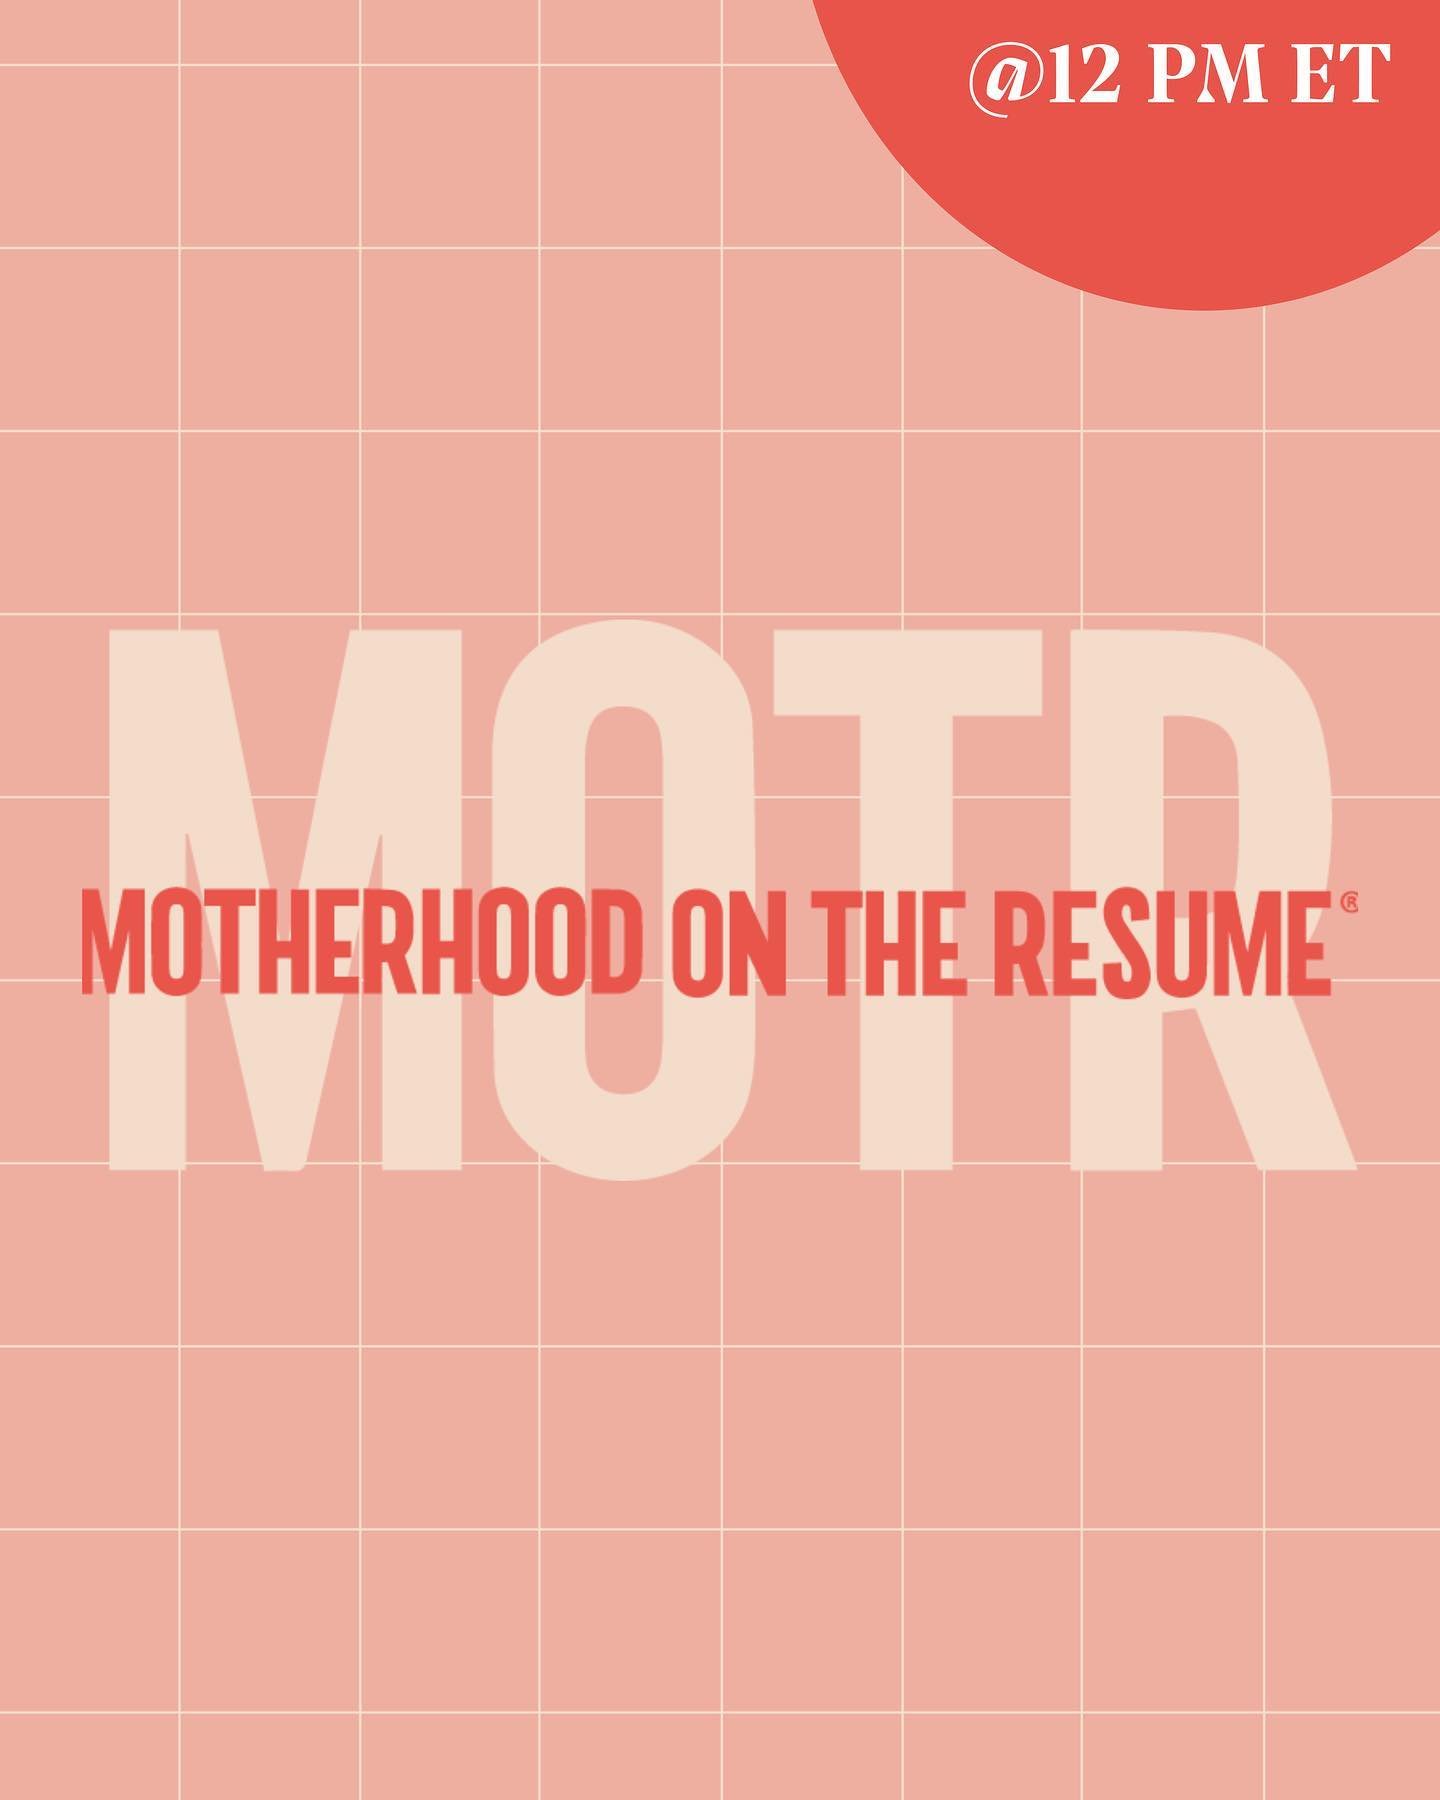 Today we&rsquo;re participating with @heymamaco to show our support for their #motherhoodontheresume campaign.  It&rsquo;s not too late to attend this FREE virtual event!

Join us to network with a community that truly understands the value of mother